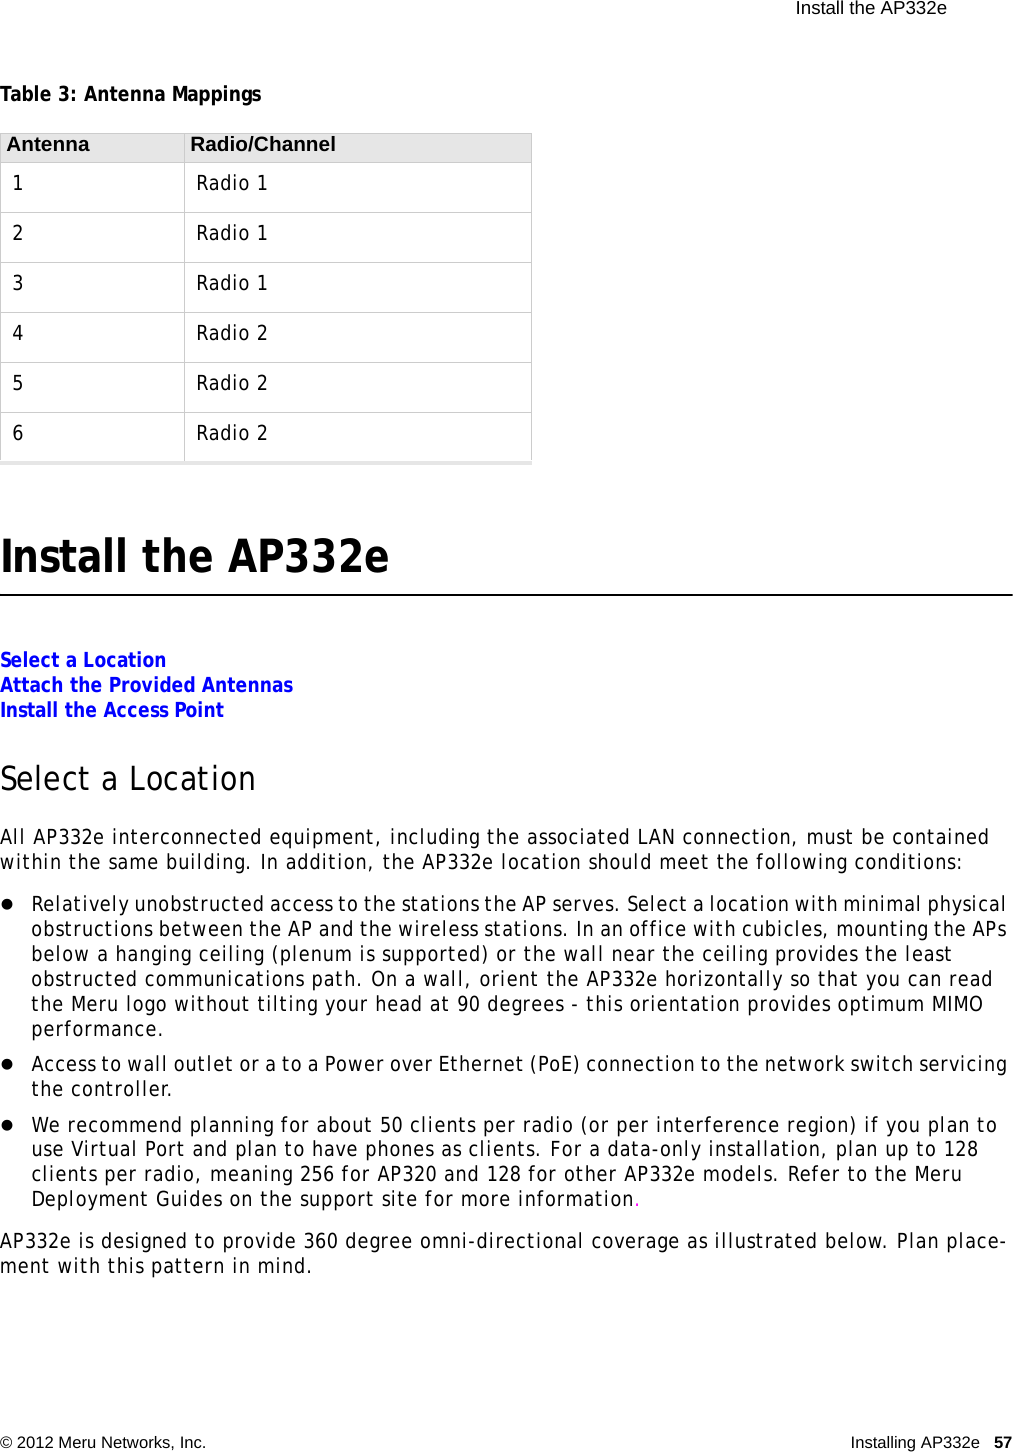  Install the AP332e © 2012 Meru Networks, Inc. Installing AP332e 57 Table 3: Antenna MappingsInstall the AP332eSelect a LocationAttach the Provided AntennasInstall the Access PointSelect a LocationAll AP332e interconnected equipment, including the associated LAN connection, must be contained within the same building. In addition, the AP332e location should meet the following conditions:Relatively unobstructed access to the stations the AP serves. Select a location with minimal physical obstructions between the AP and the wireless stations. In an office with cubicles, mounting the APs below a hanging ceiling (plenum is supported) or the wall near the ceiling provides the least obstructed communications path. On a wall, orient the AP332e horizontally so that you can read the Meru logo without tilting your head at 90 degrees - this orientation provides optimum MIMO performance. Access to wall outlet or a to a Power over Ethernet (PoE) connection to the network switch servicing the controller. We recommend planning for about 50 clients per radio (or per interference region) if you plan to use Virtual Port and plan to have phones as clients. For a data-only installation, plan up to 128 clients per radio, meaning 256 for AP320 and 128 for other AP332e models. Refer to the Meru Deployment Guides on the support site for more information.AP332e is designed to provide 360 degree omni-directional coverage as illustrated below. Plan place-ment with this pattern in mind. Antenna Radio/Channel1Radio 12Radio 13Radio 14Radio 25Radio 26Radio 2